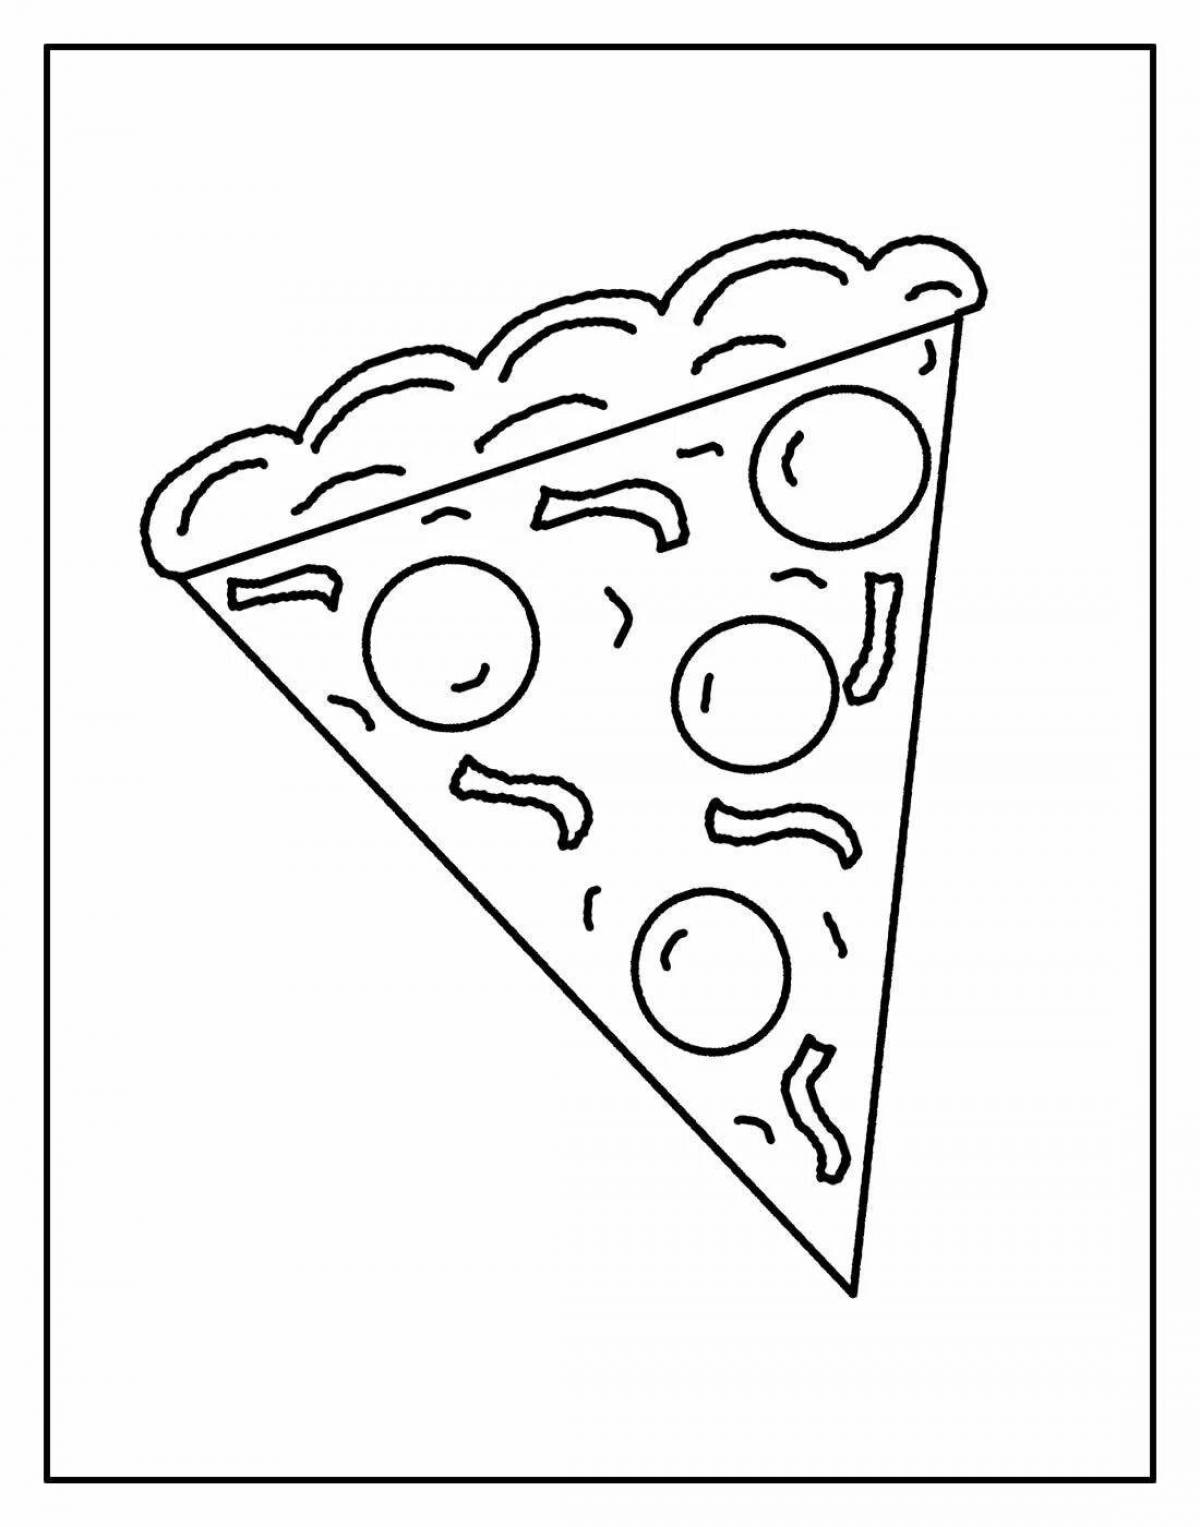 Appetizing pizza slice coloring book